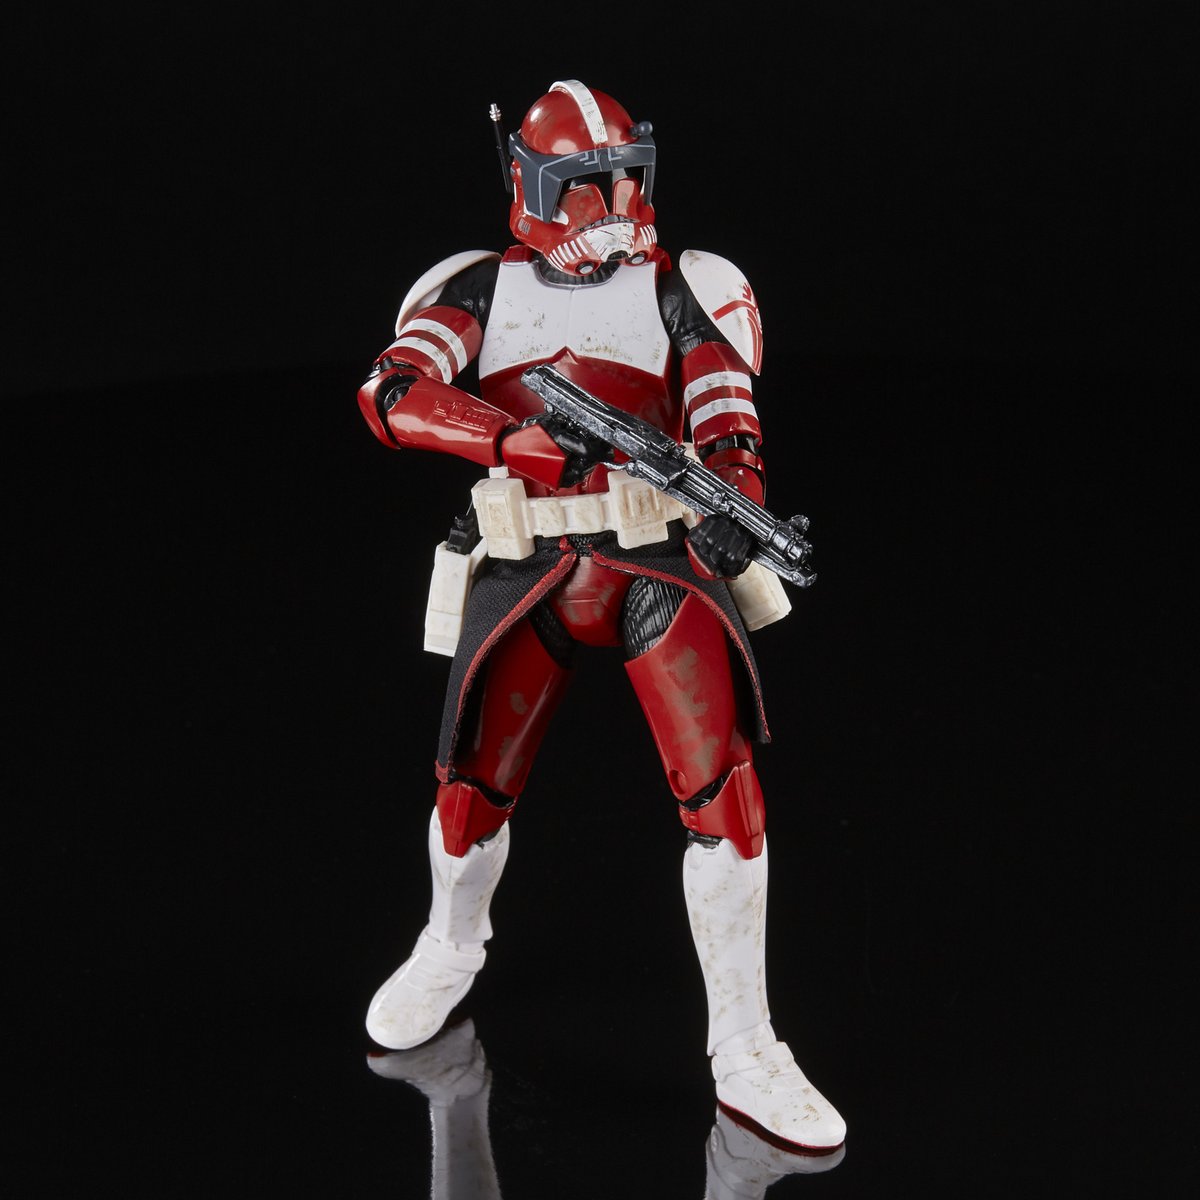 Star Wars: The Black Series 6' Clone Commander Fox (The Clone Wars) available for pre-order! bit.ly/3V0tEbg #starwars #starwarsblackseries #clonecommanderfox #clonewars #bigbadtoystore #bbts